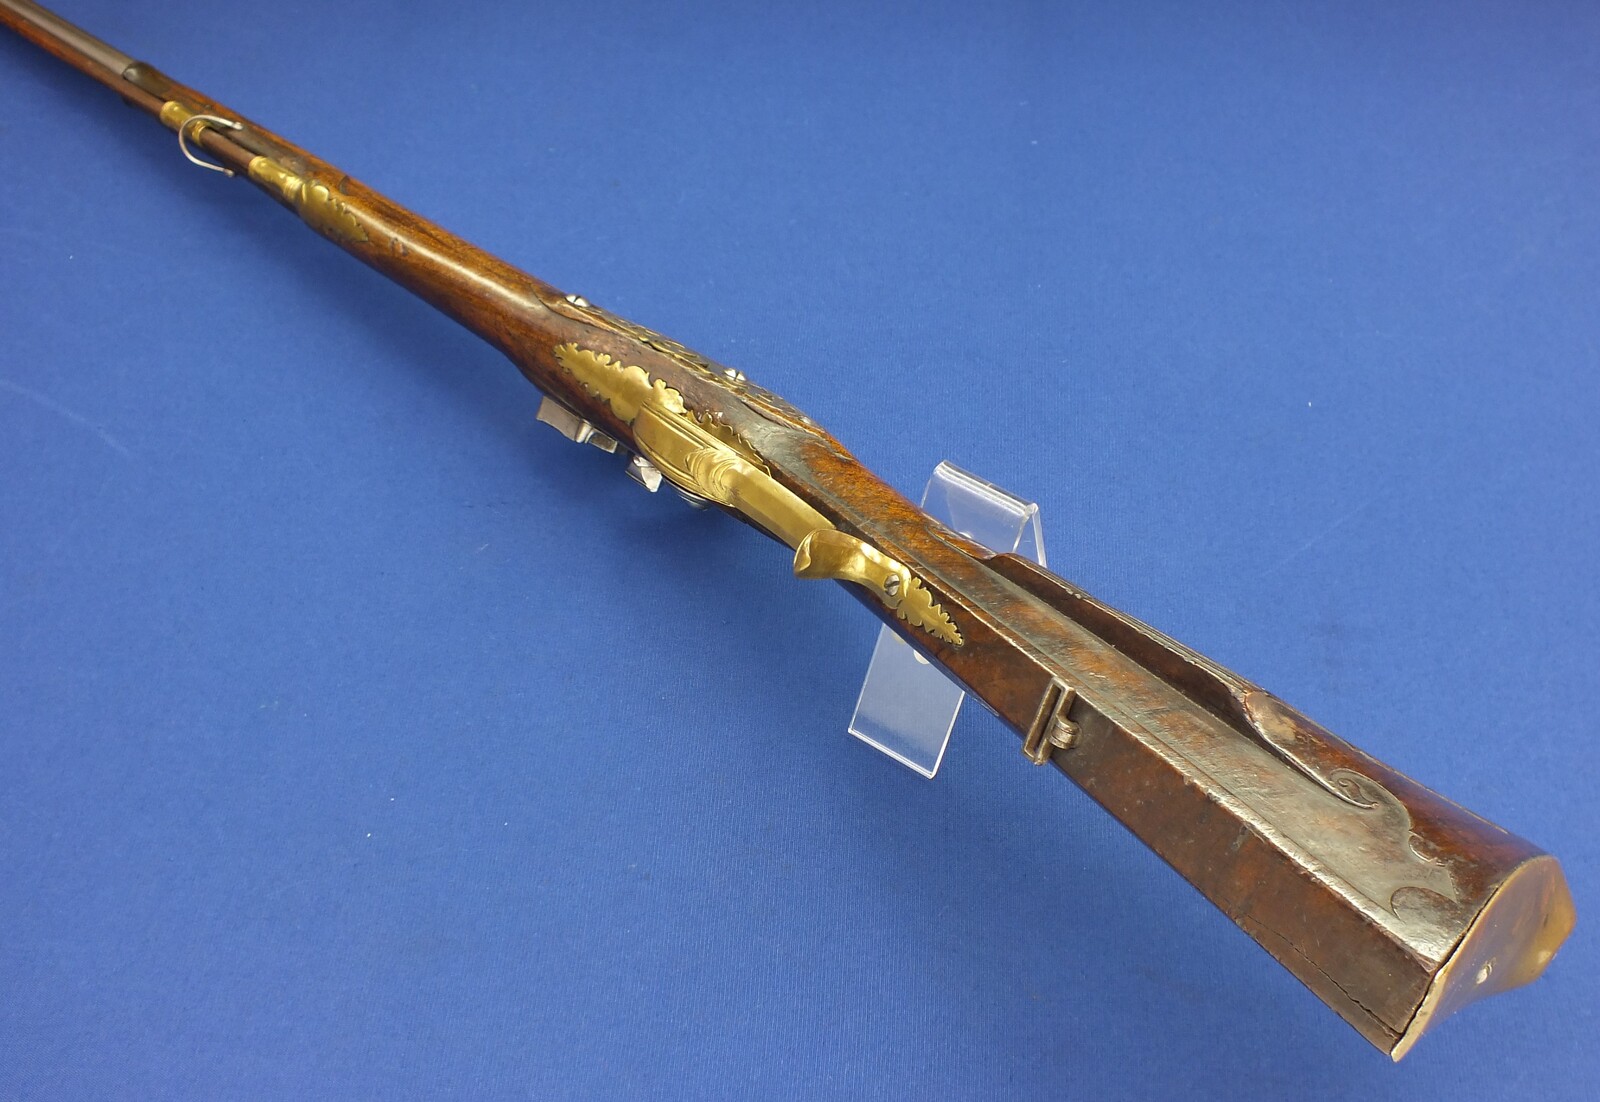 A very nice antique 18th Century German Flintlock Gun, caliber 15 mm smooth, length 145 cm, provenance the German Noble Family Thurn & Taxis - Castle Regensburg, in very good condition. Price 2.800 euro